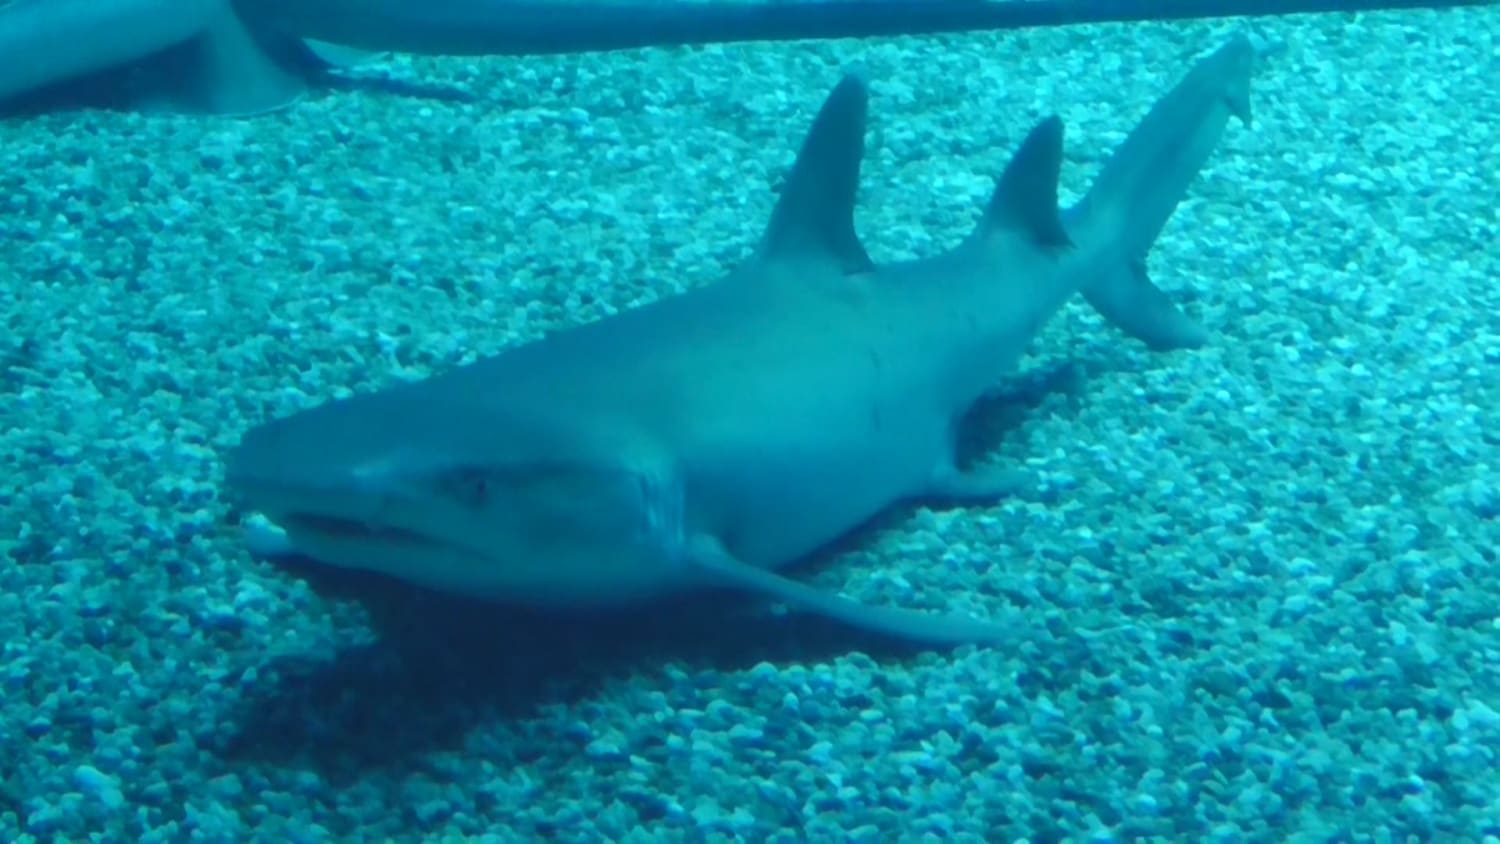 While some sharks need to constantly be moving in order to wash oxygen rich water over their gills, some sharks can pump water through their gills with their phyranx. However, all sharks must move to stop from falling to the bottom of the seafloor as they lack a swim bladder for buoyancy.